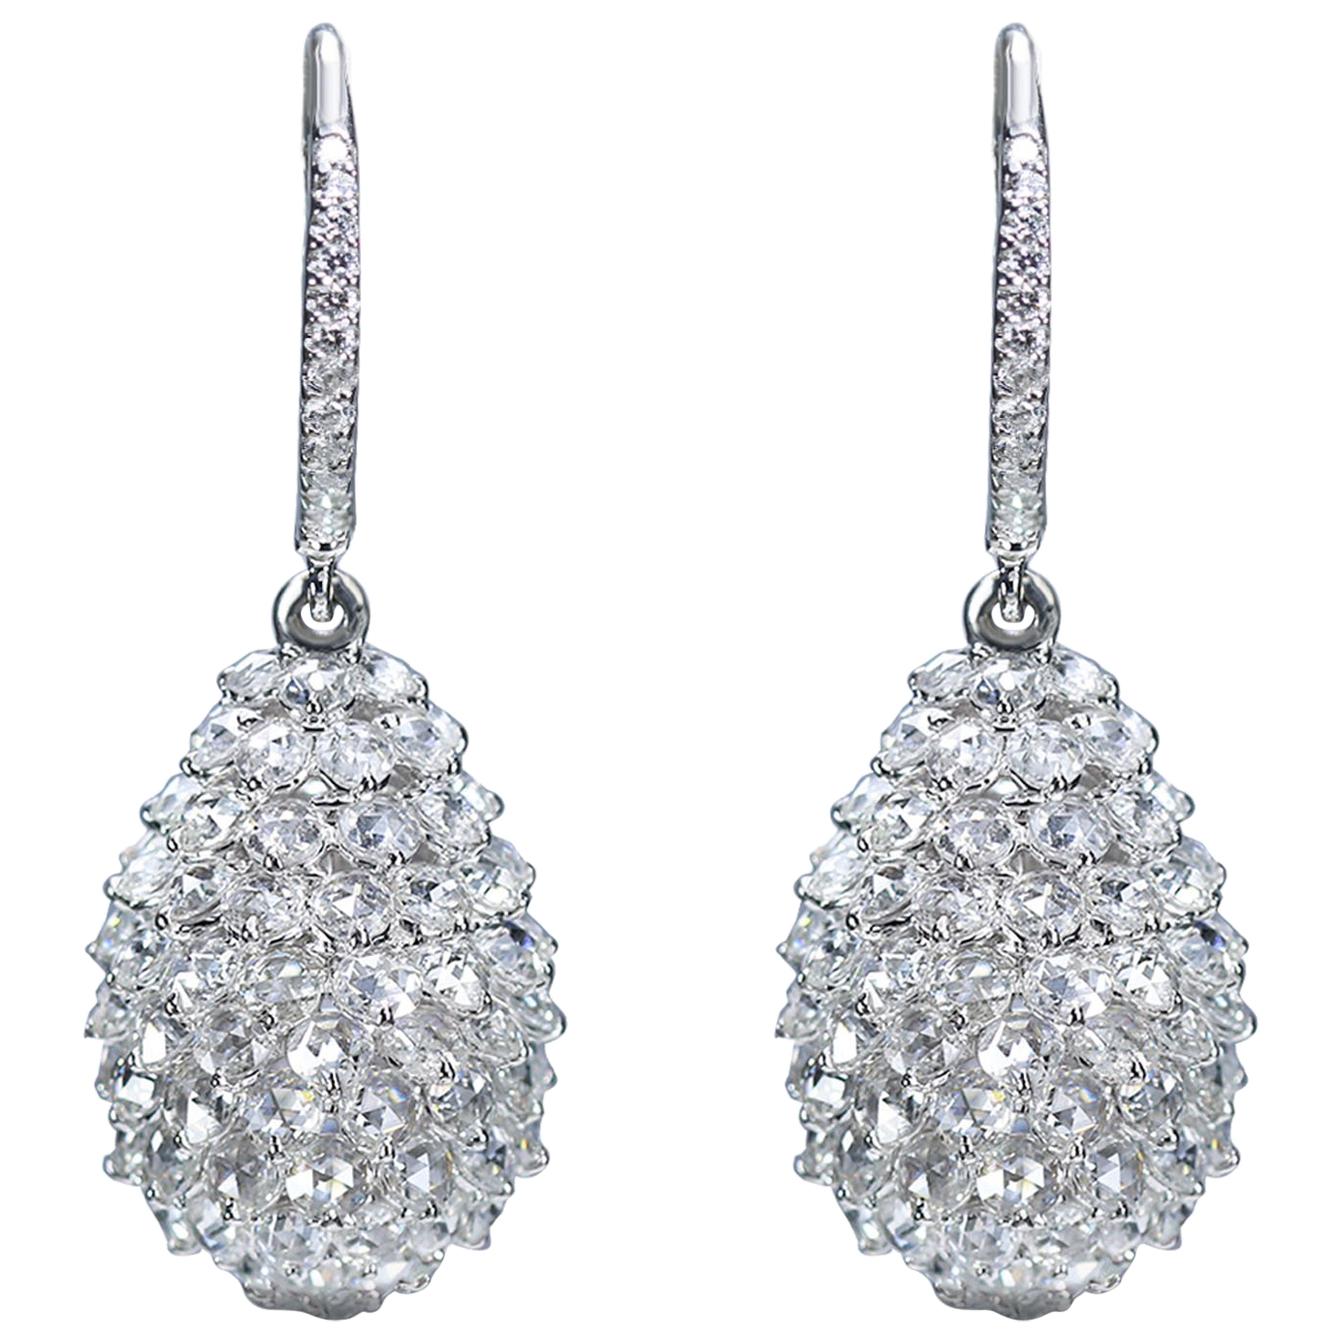 F-G/ VS-SI brilliant cut and rosecut diamond earrings

These diamond drop earrings are a rare combination of modern design and delicate sensibility. Created using an 18K white gold and studded with 246 F-G color VS-SI brilliant and rosecut diamonds